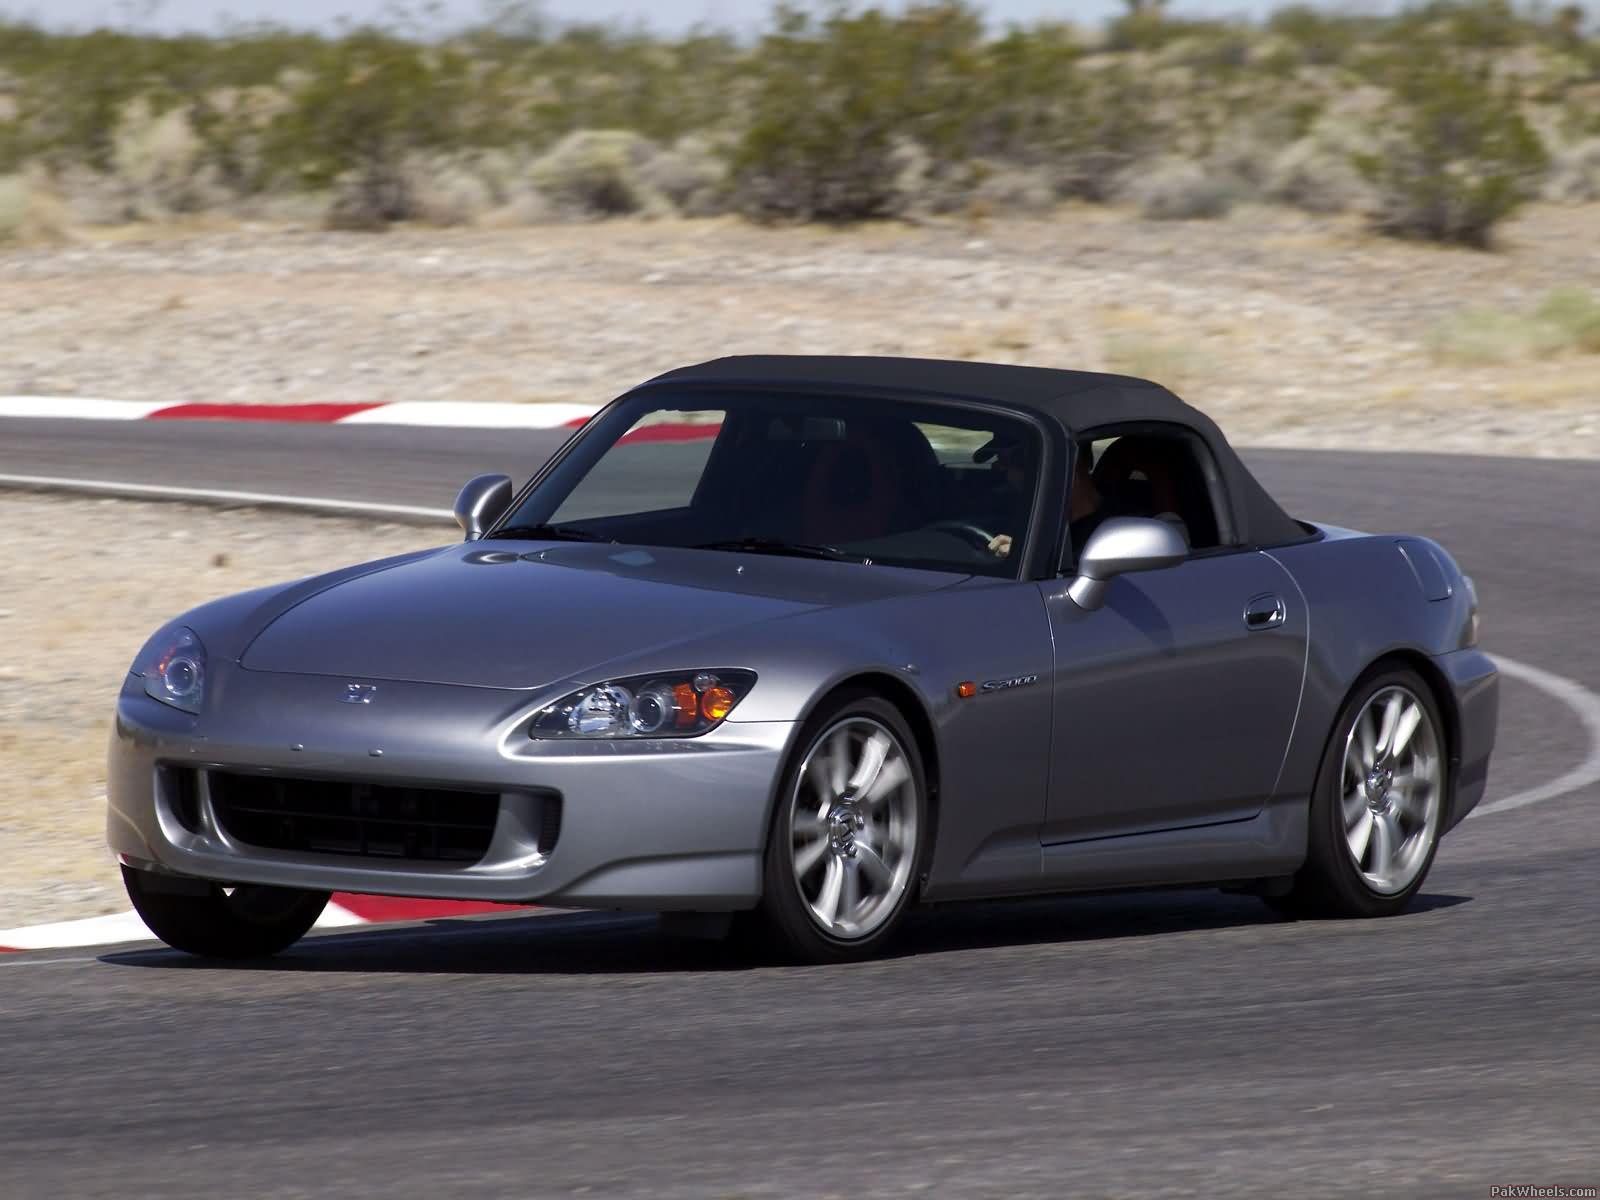 Wallpapers for Honda S2000 | Best Wall Papers With Latest Collection